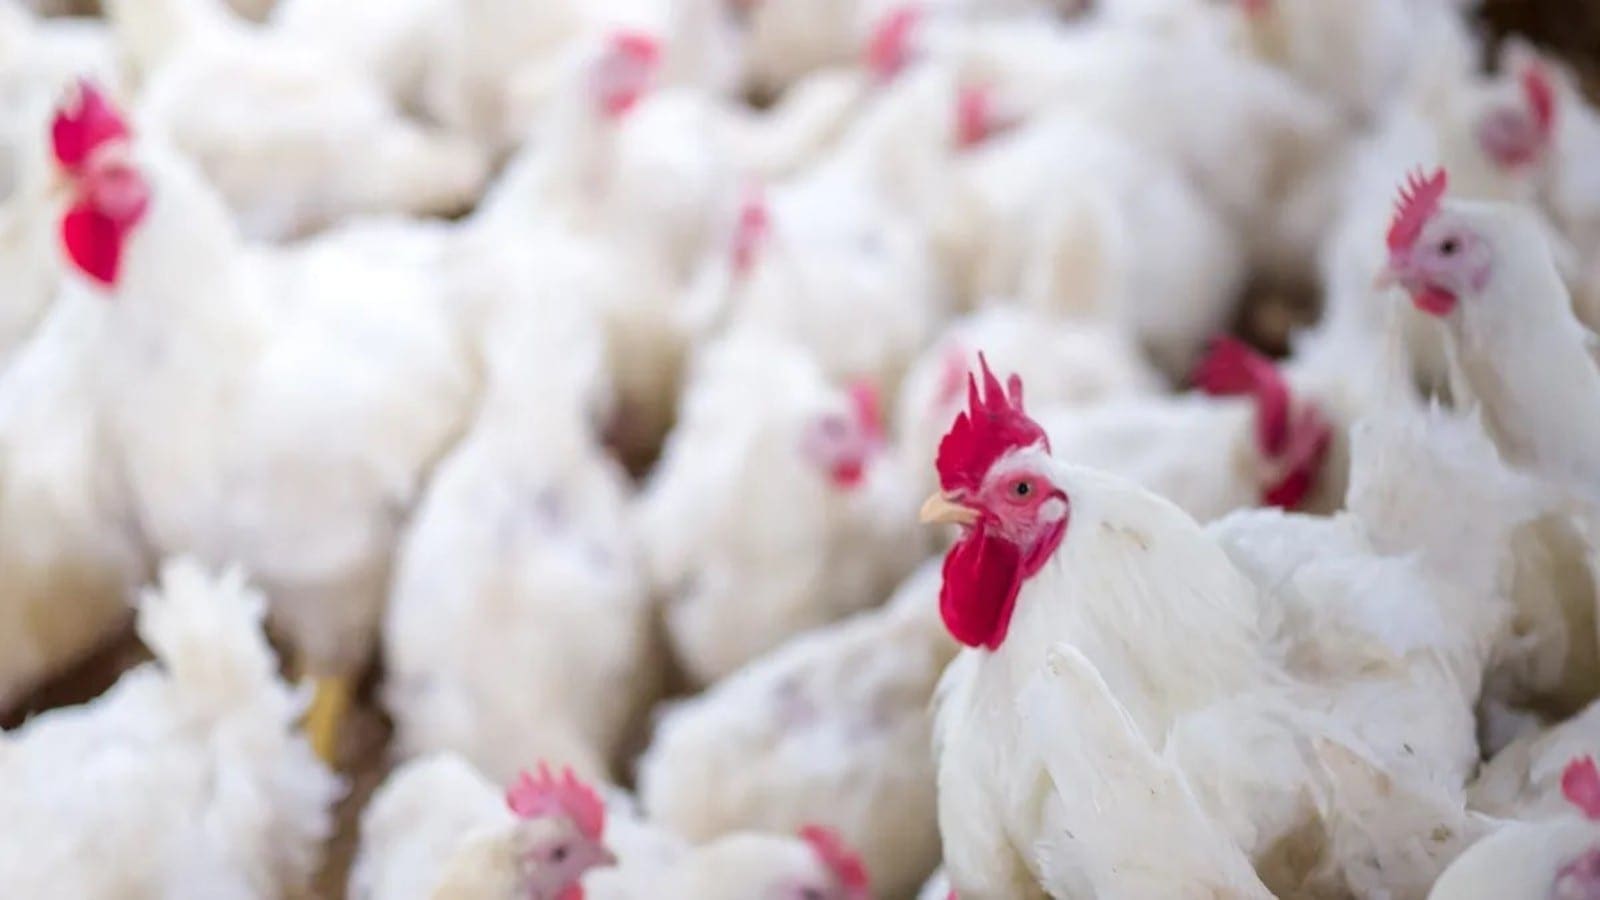 Amo Farm partners with University of Ilorin to advance poultry production in Nigeria